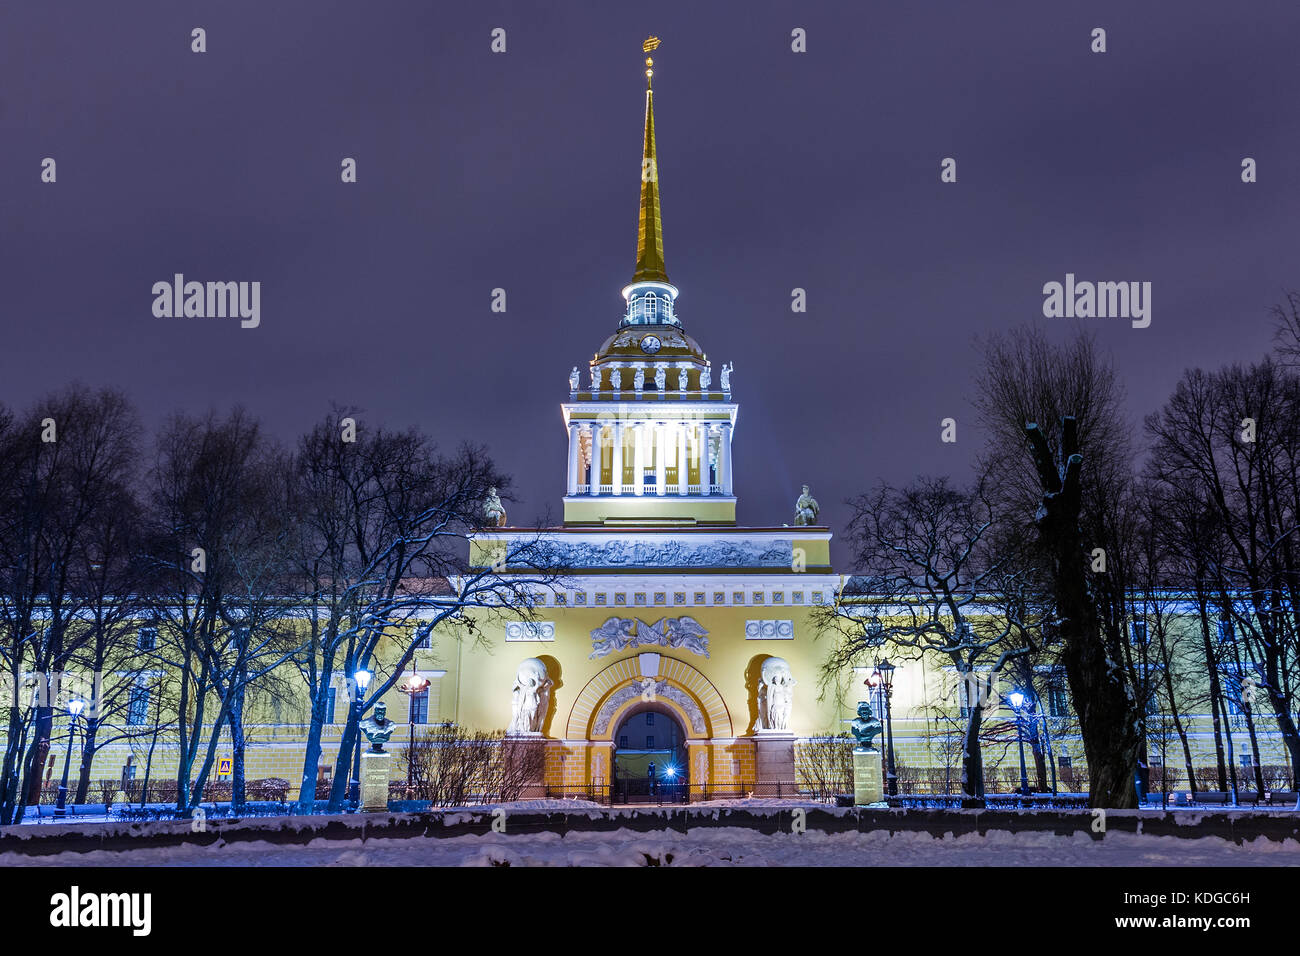 Old historical architecture landmark and touristic spot in Saint Petersburg, Russia: historical Admiralty building by a winter night with park and tre Stock Photo